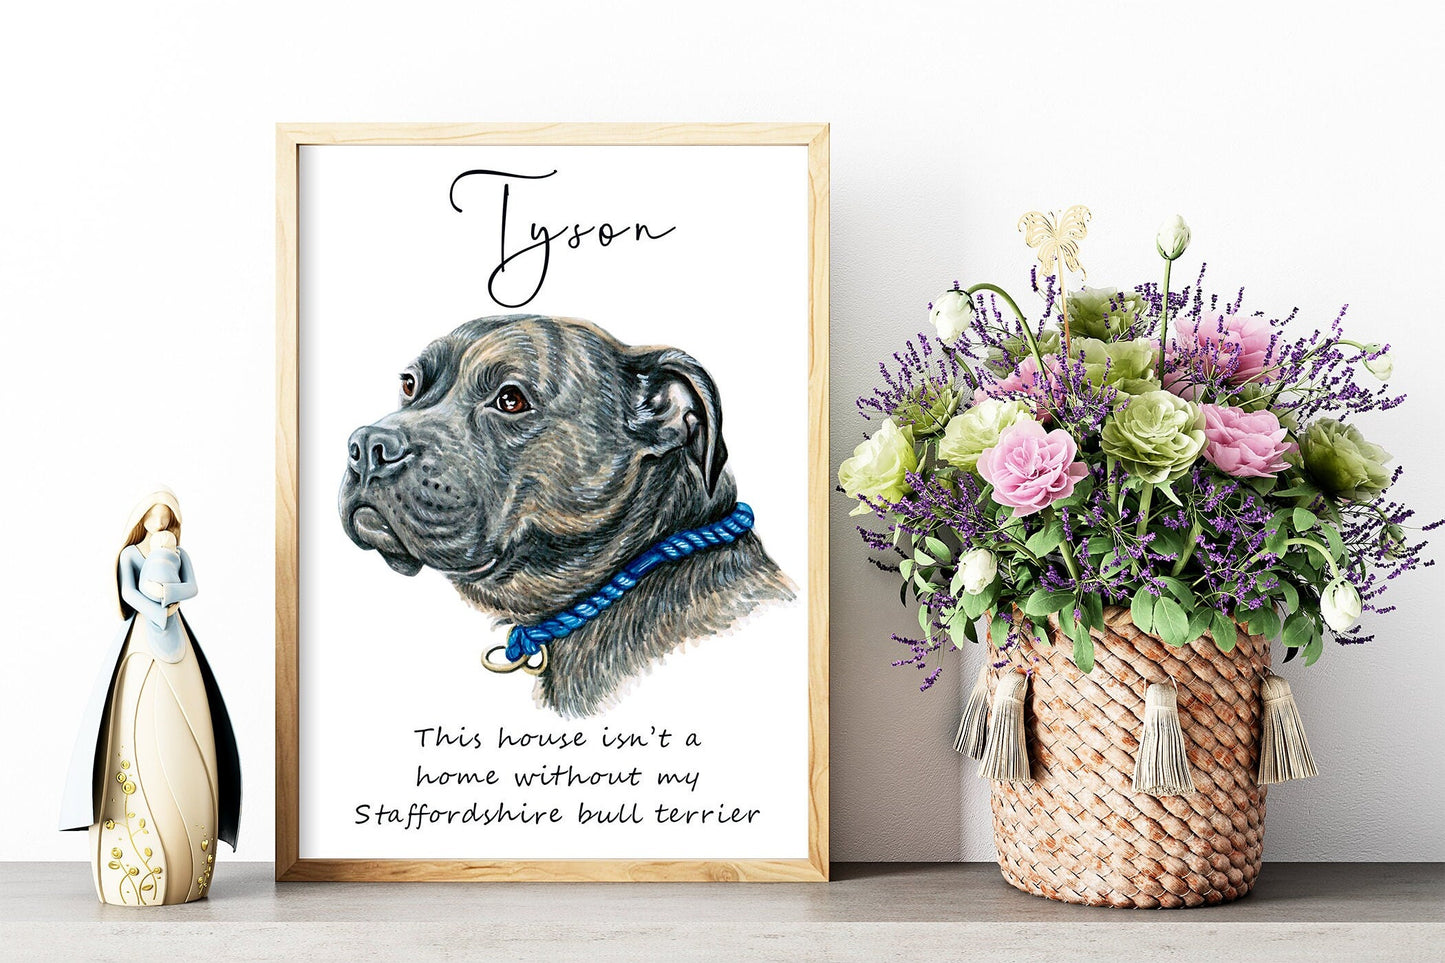 Staffordshire bull terrier artwork - Adorable Staffie dog portraits with custom funny or heart warming message | A4 | A5 | Greeting card